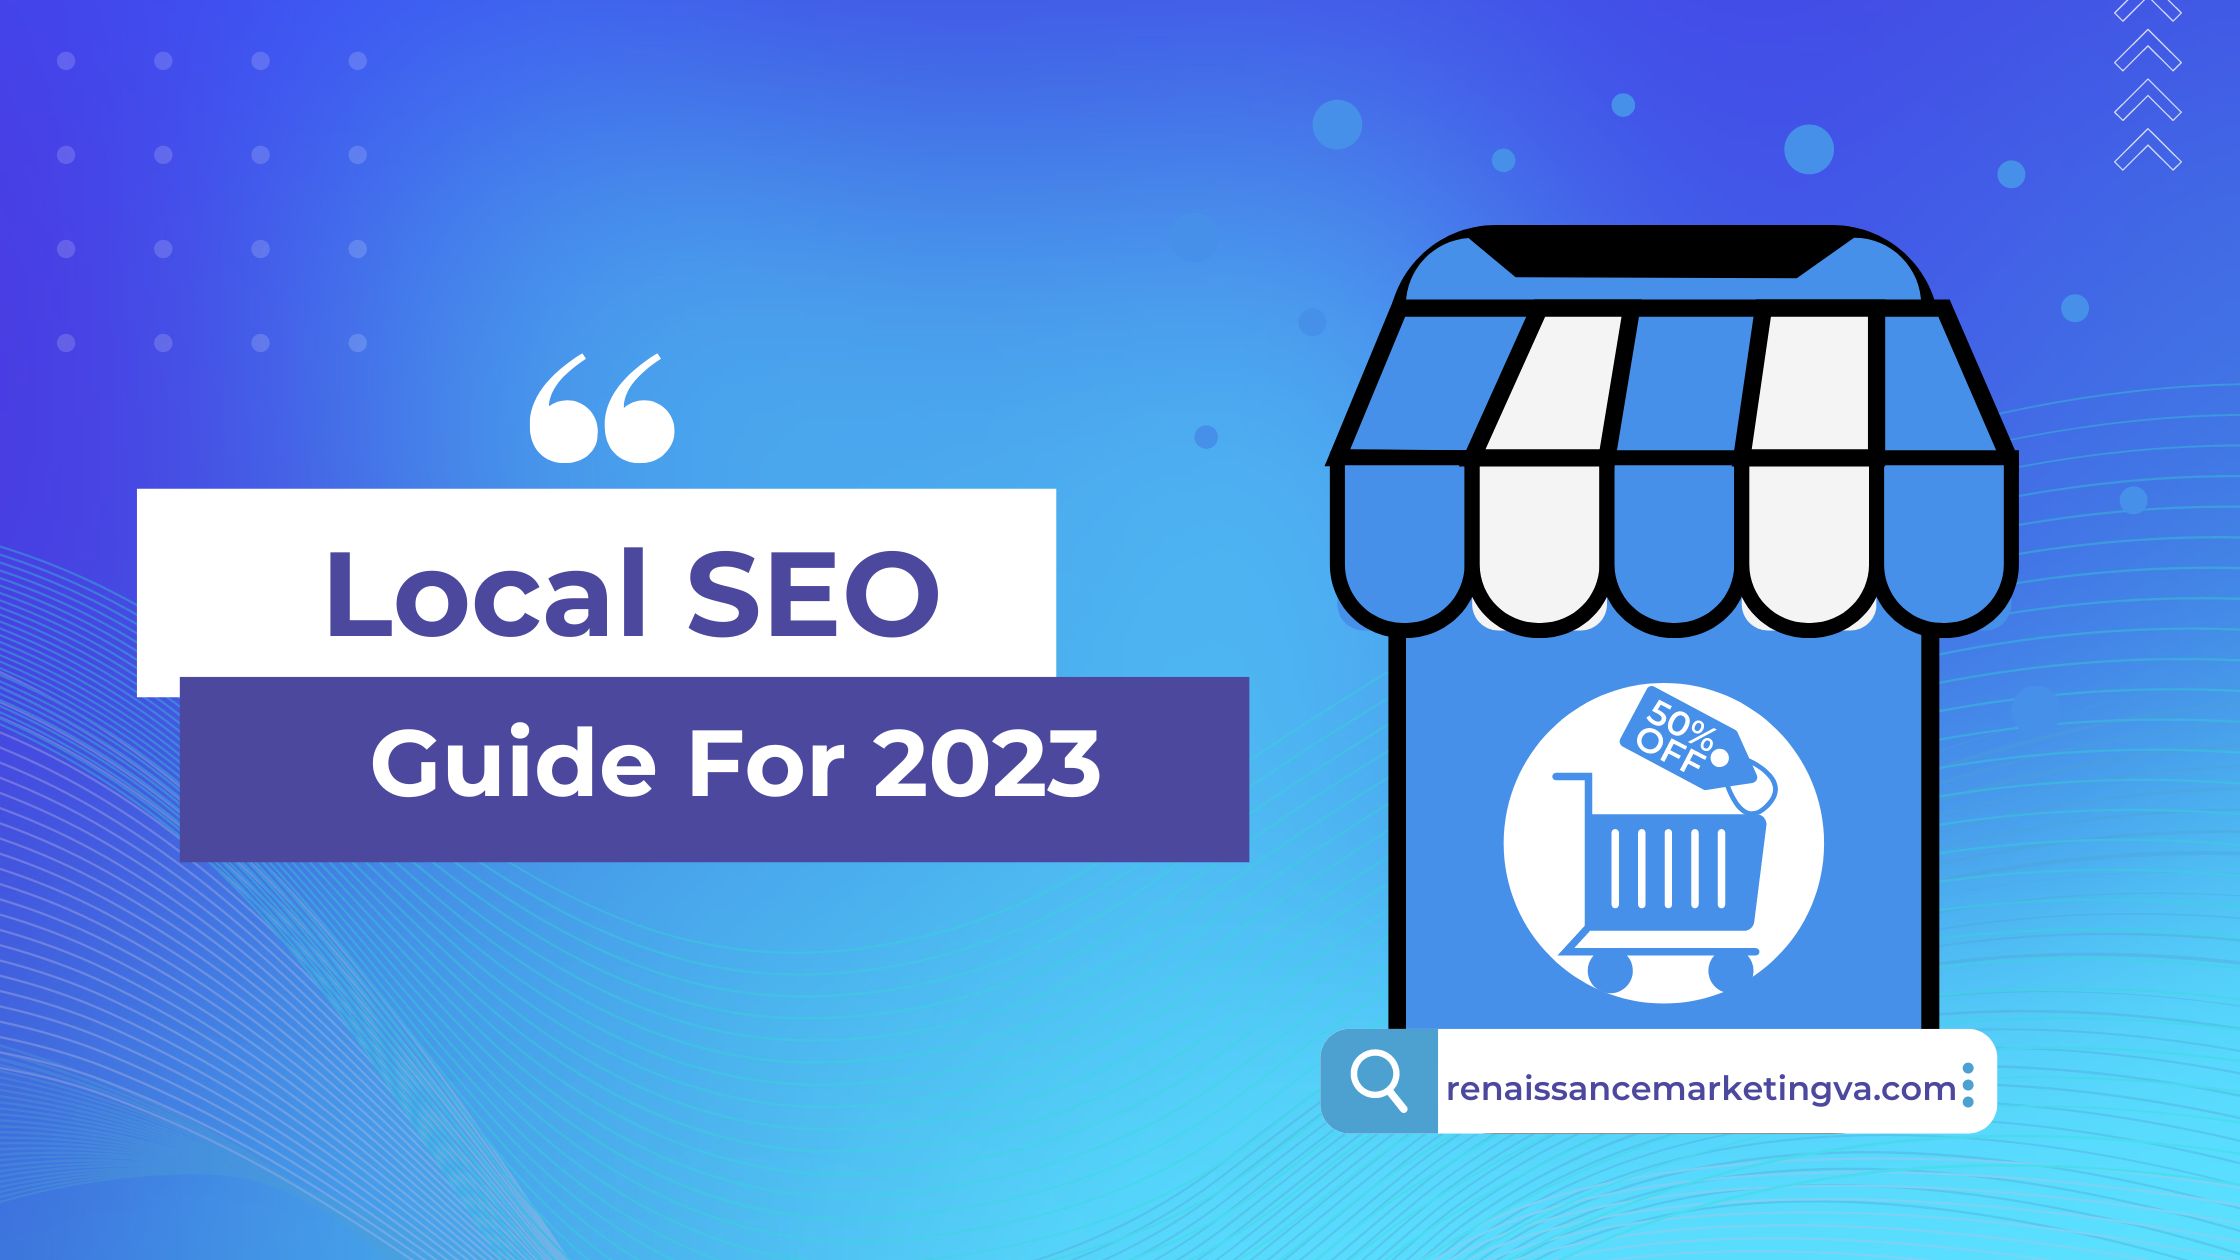 Local-SEO-Guide-For-2023-By-Renaissance-Marketing